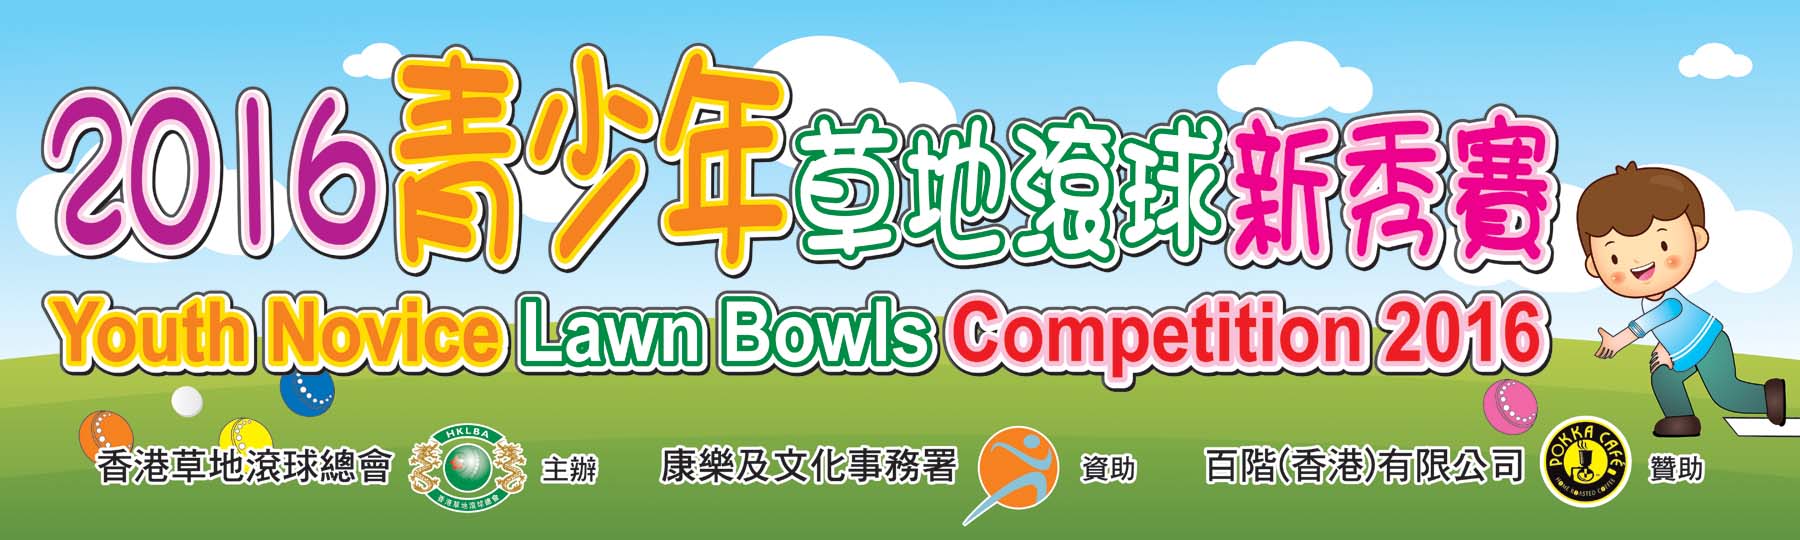 Youth Novice Lawn Bowls Competition 2016 (Updated on 19/2/16)